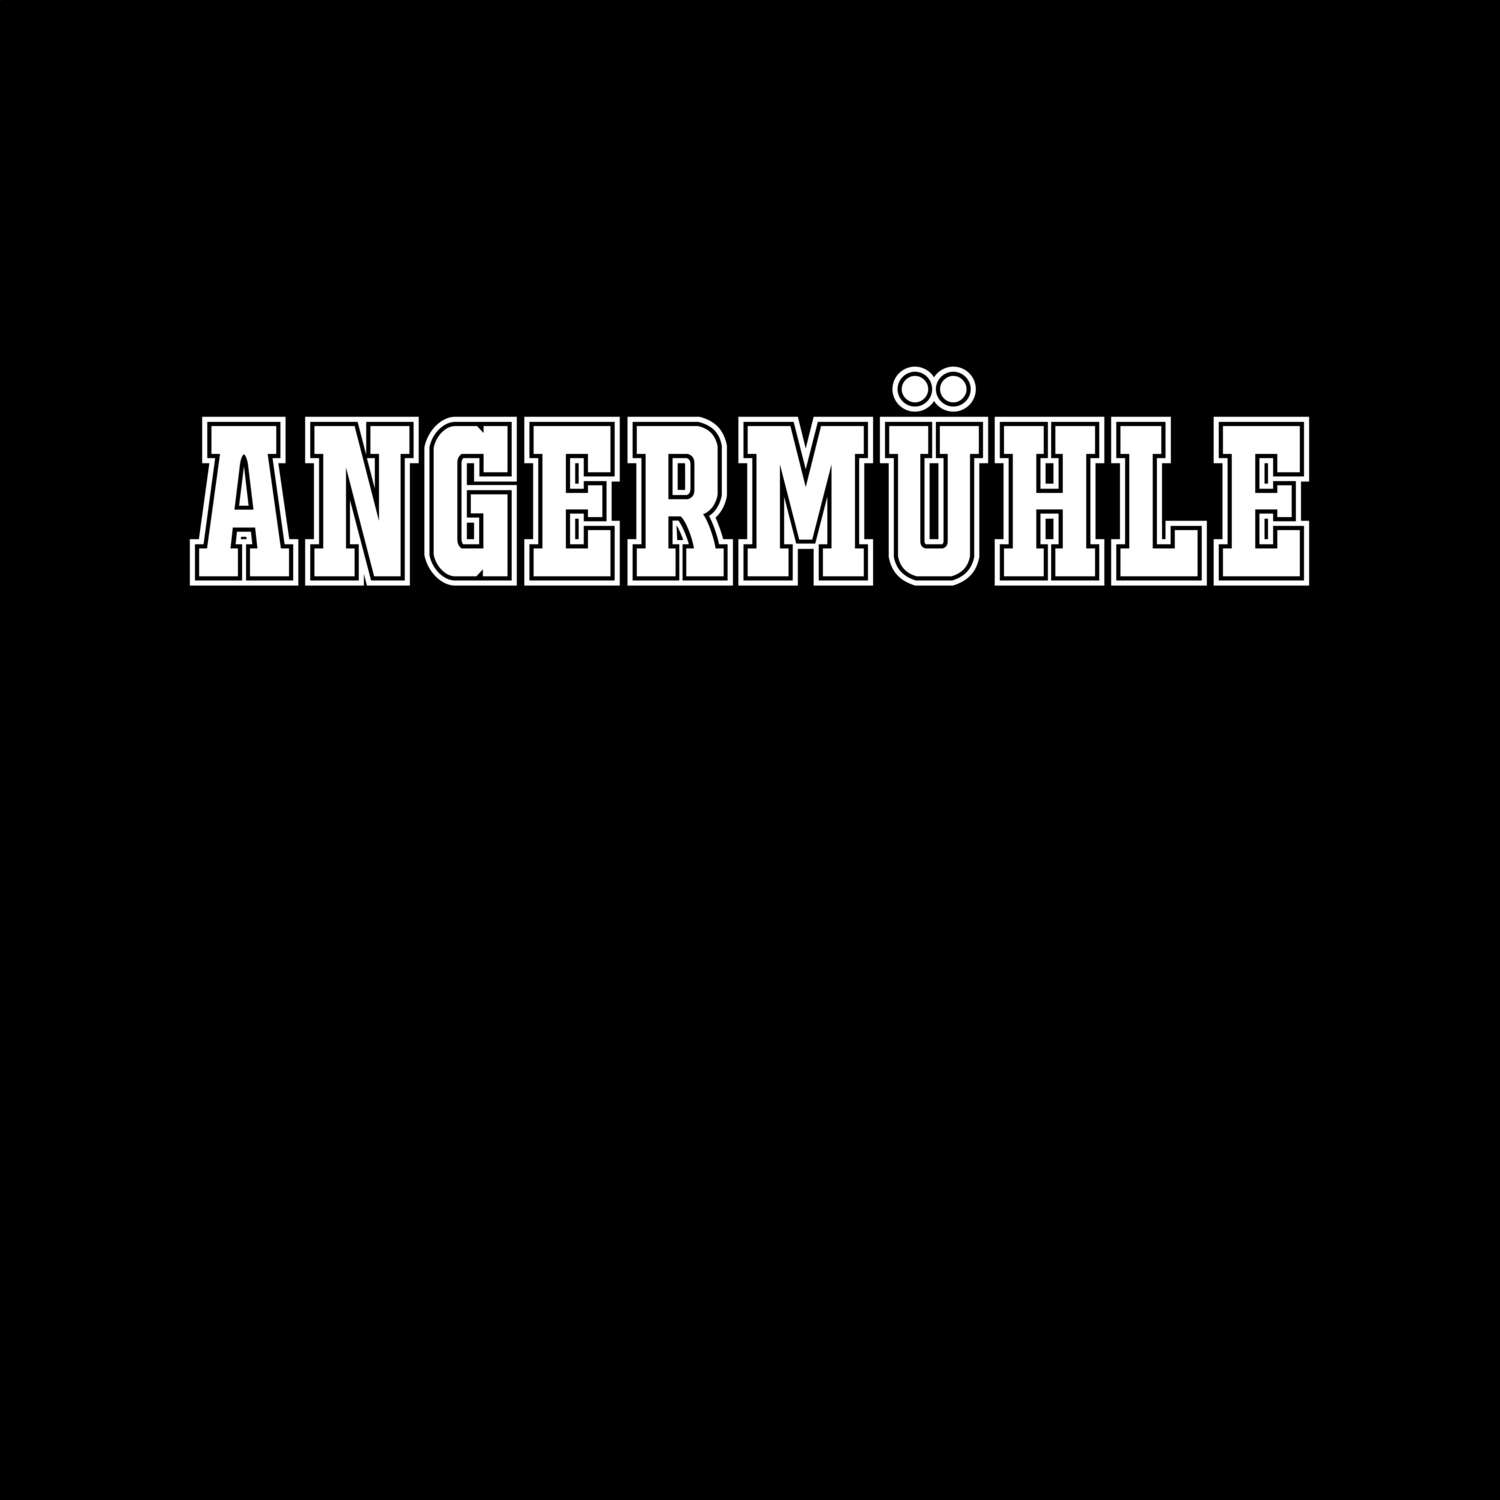 Angermühle T-Shirt »Classic«